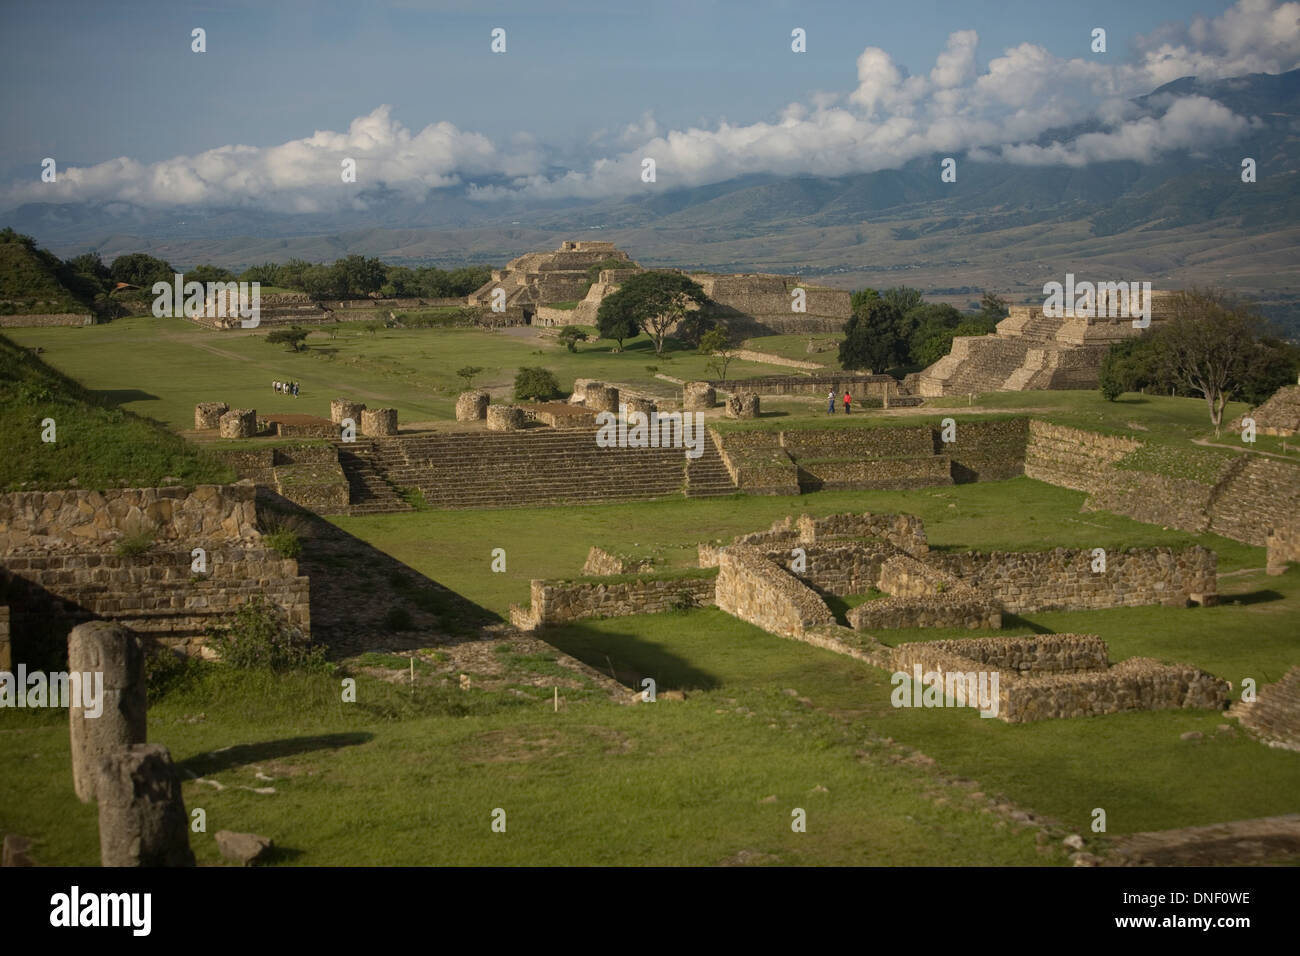 Overview of the Zapotec city of Monte Alban, Oaxaca, Mexico, July 13, 2012. Stock Photo